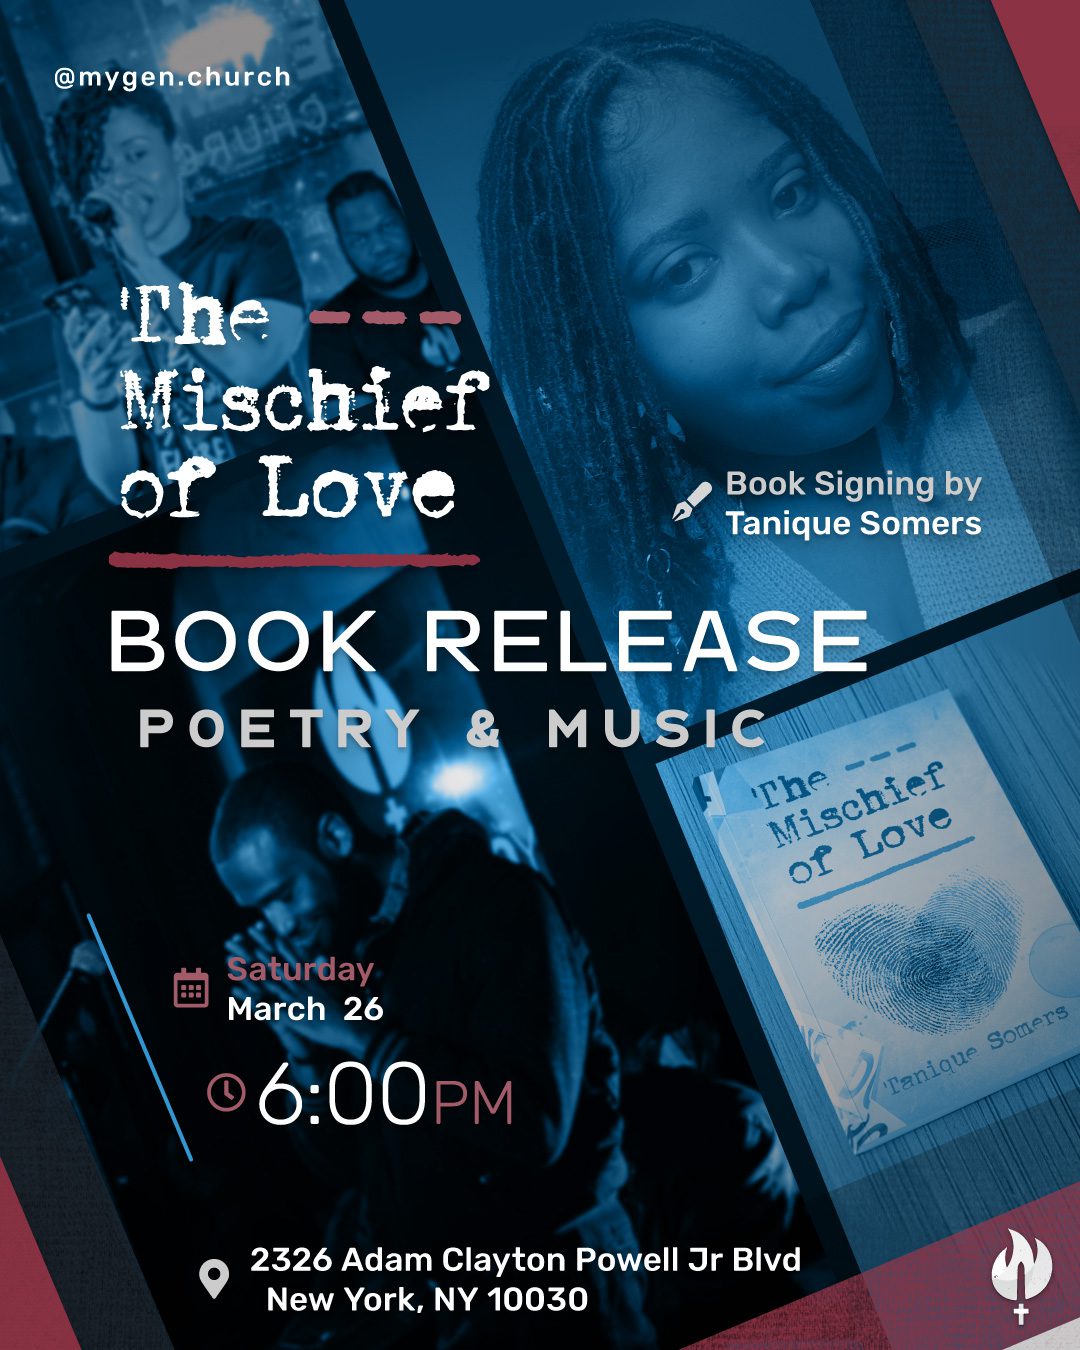 The Mischief of Love Book Release, Poetry & Music Event